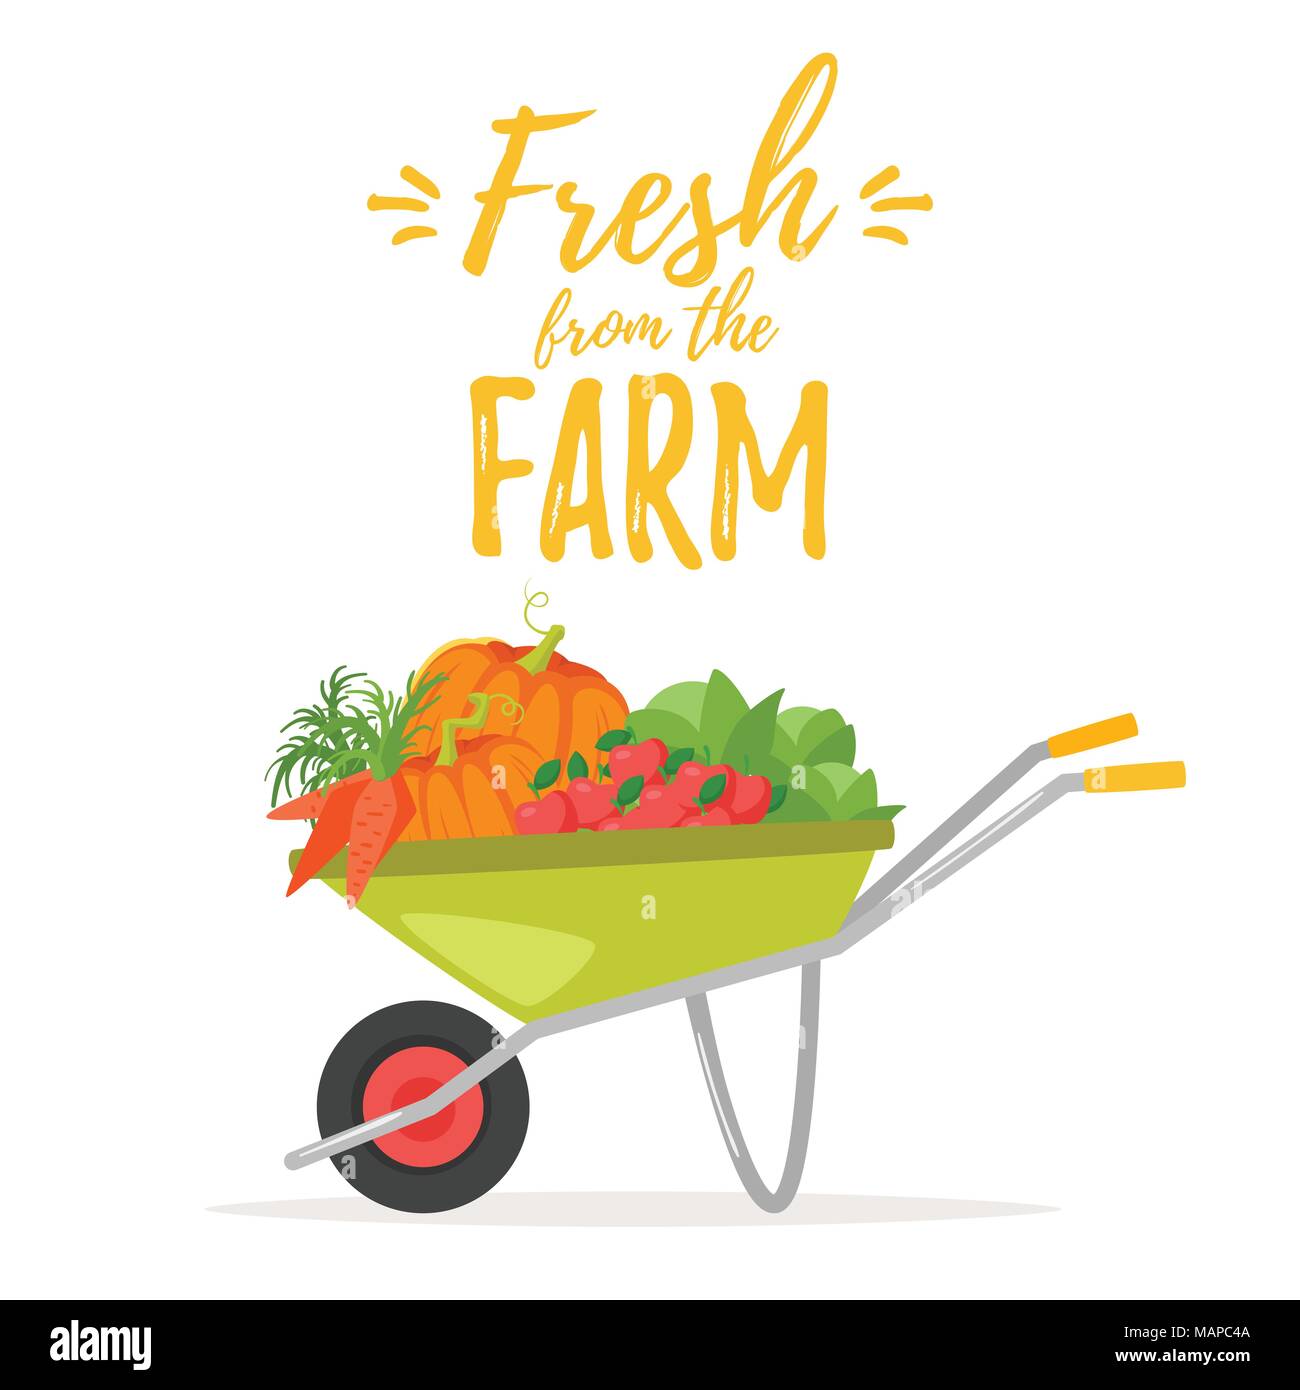 Vector cartoon style illustration of hand cart trolley full of natural organic vegetables. Fresh from the farm text. Stock Vector